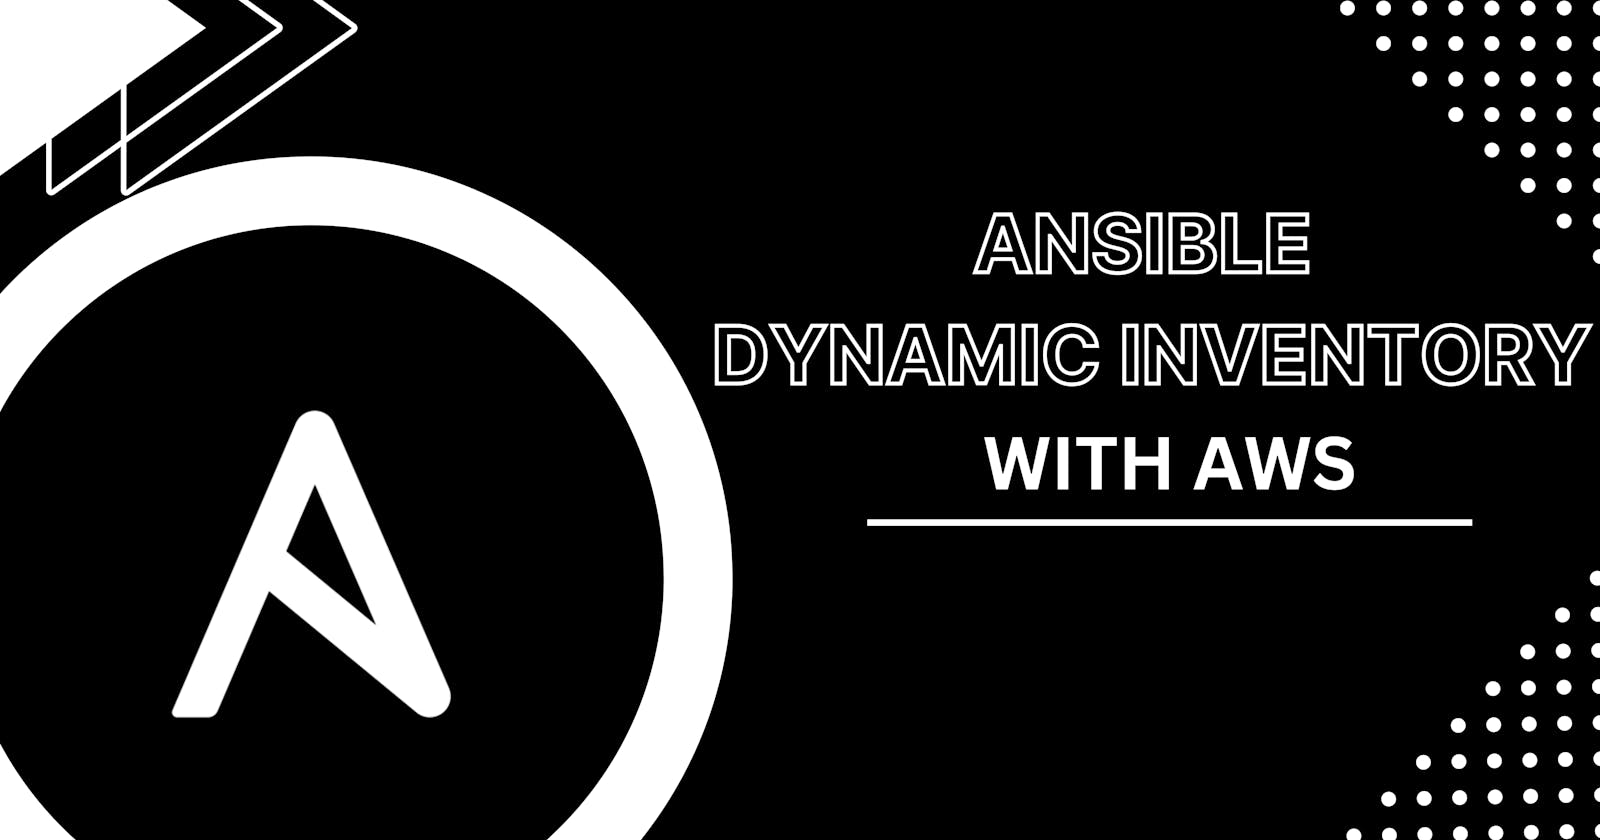 Working with Ansible Dynamic Inventory using AWS